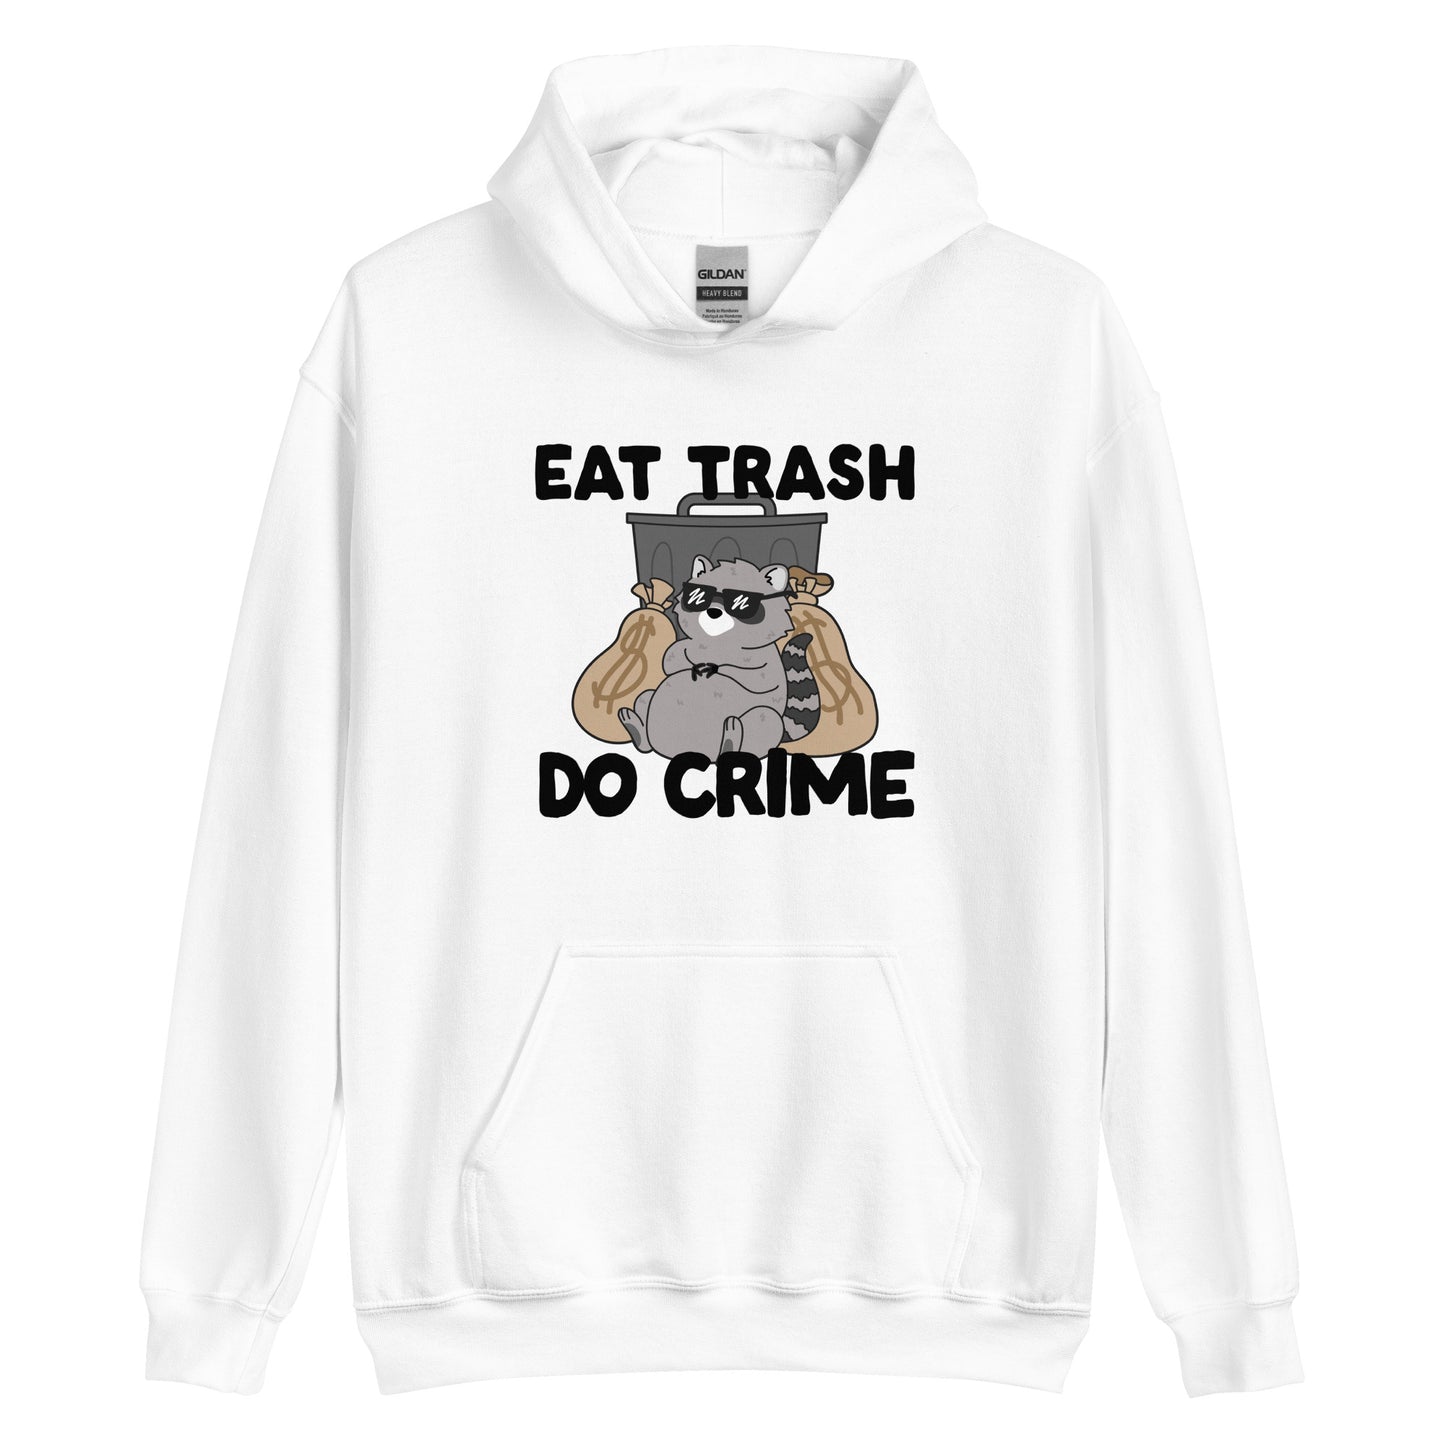 A white hooded sweatshirt featuring an illustration of a chubby raccoon wearing sunglasses. The raccoon is leaning back against a trash can and two large bags of money. Text surrounding the image reads "Eat Trash. Do Crime."